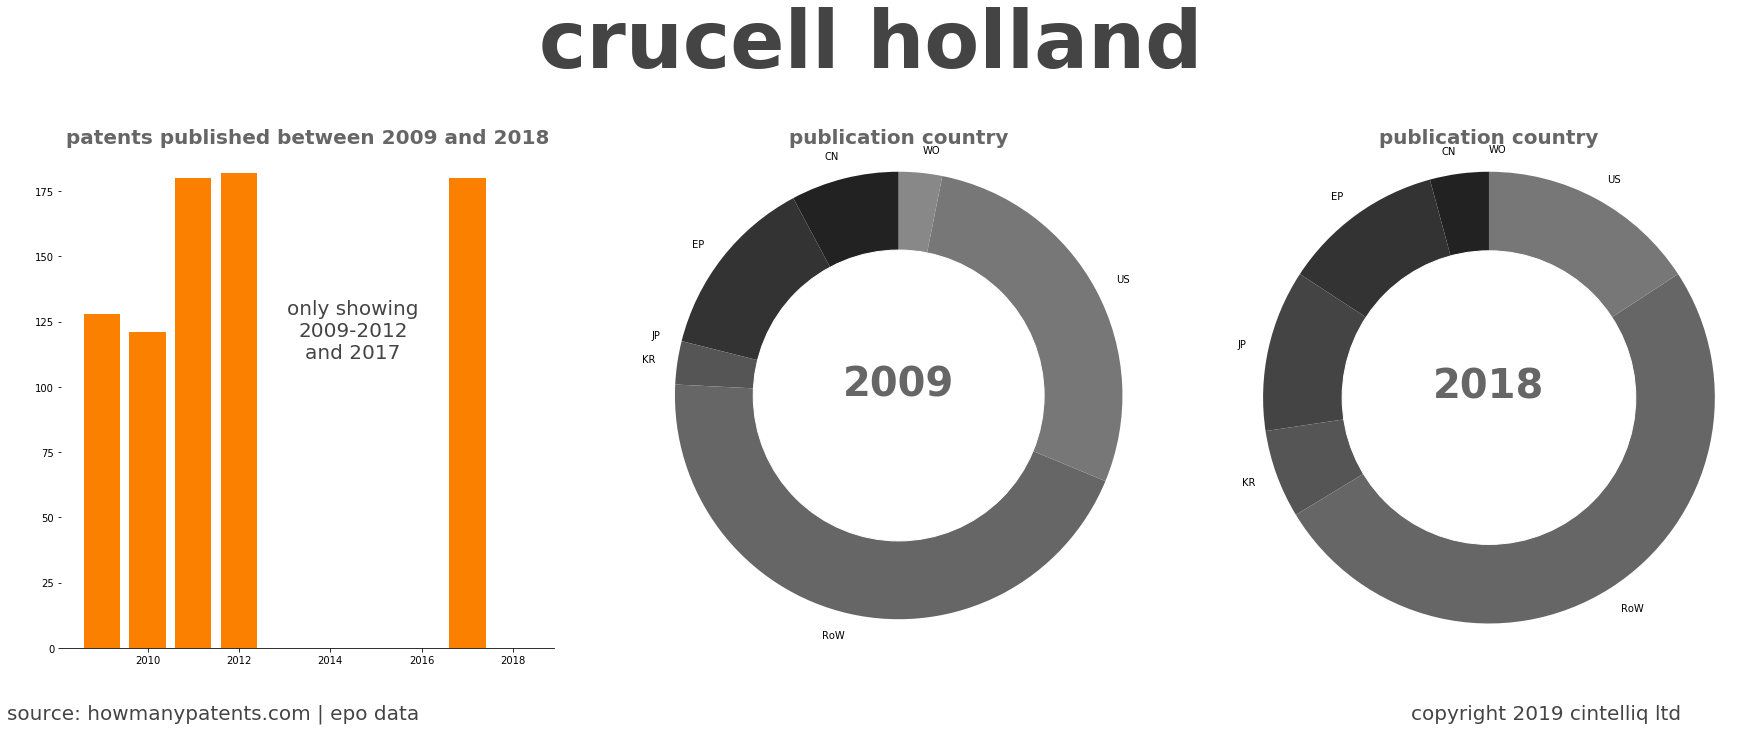 summary of patents for Crucell Holland